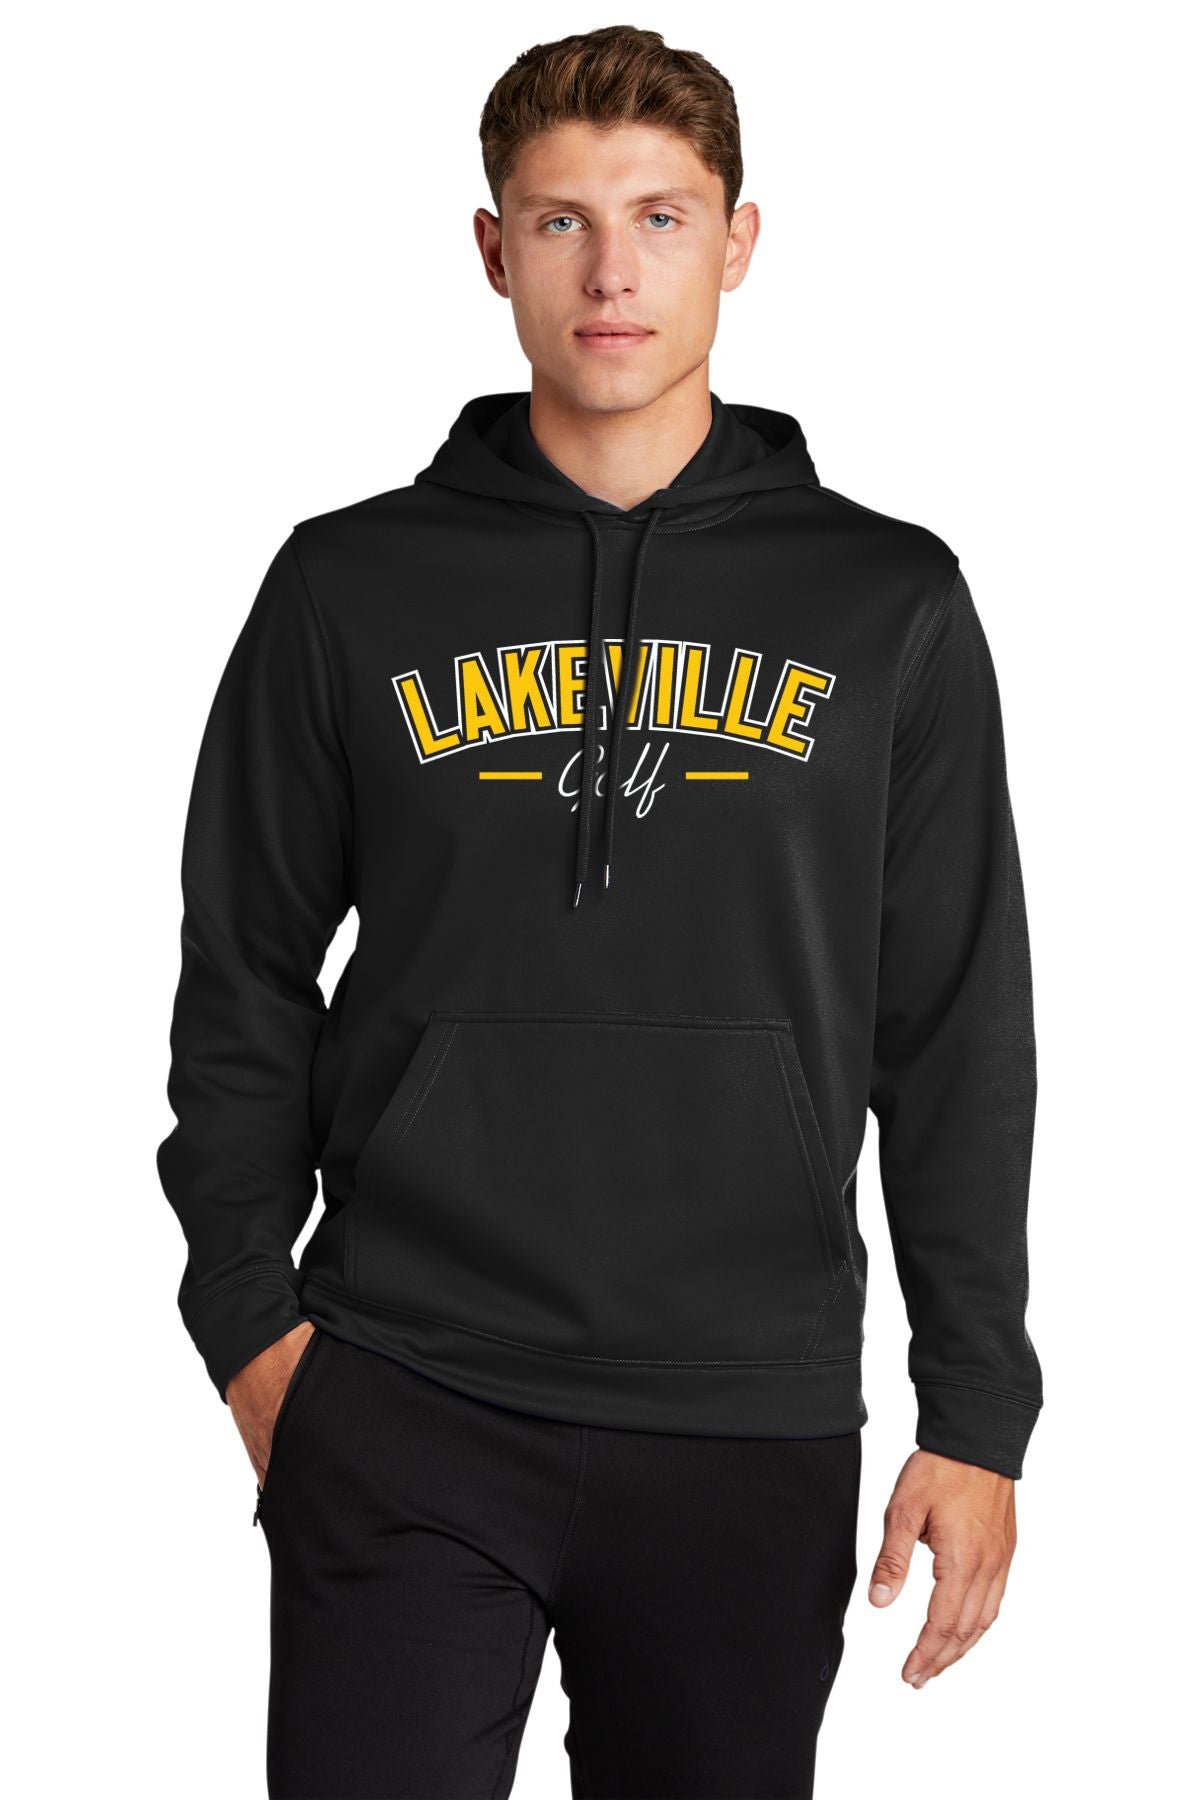 Lakeville Golf Performance Hooded Pullover